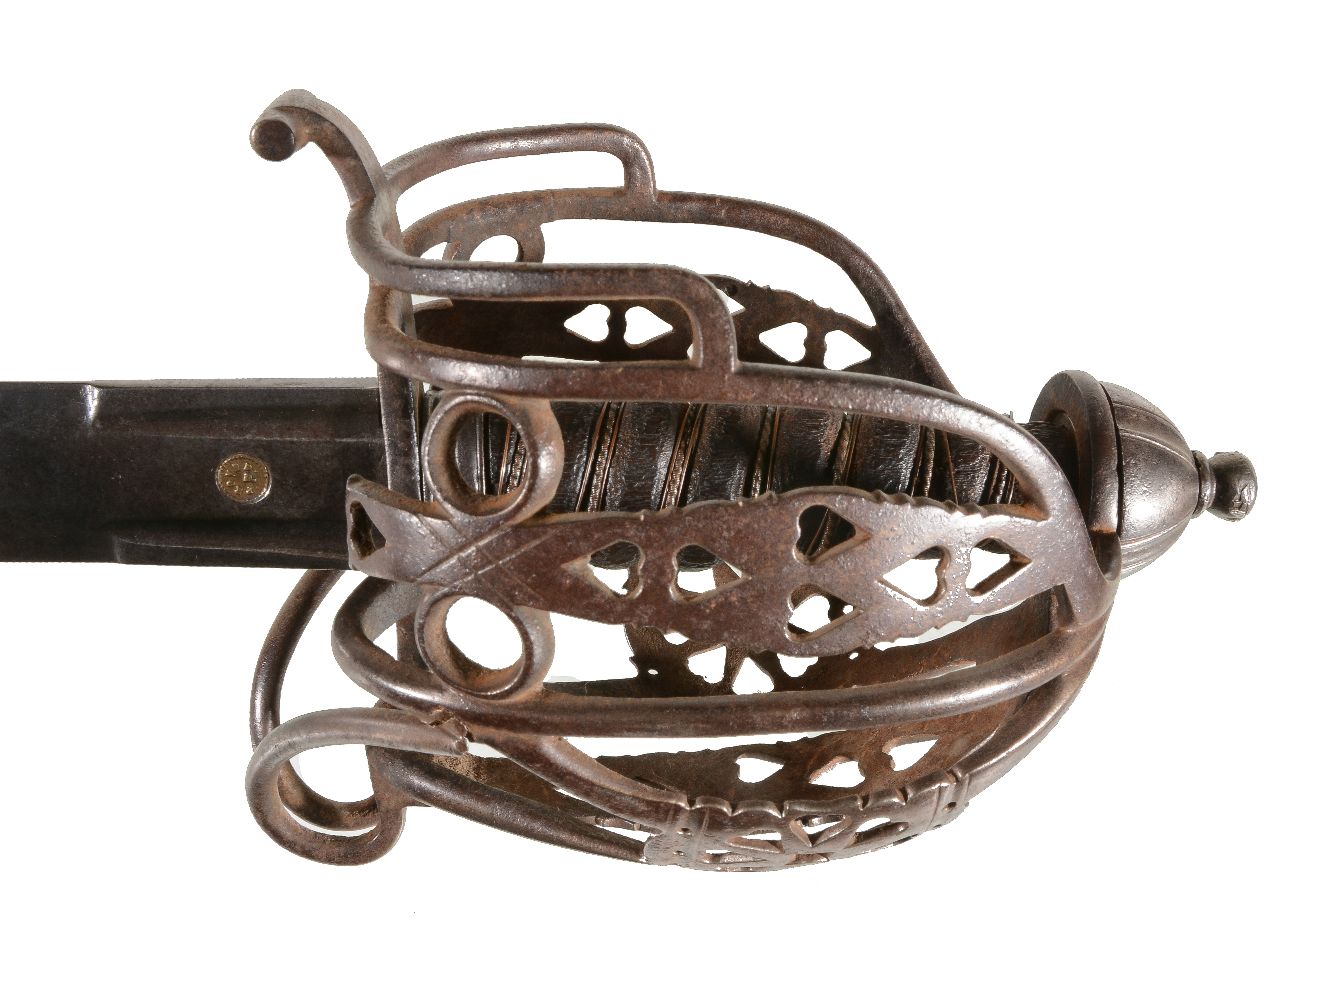 A Scottish basket-hilt broadsword, 19th century, with 32 inch 'proved' blade, 96cm long overall - Image 2 of 2